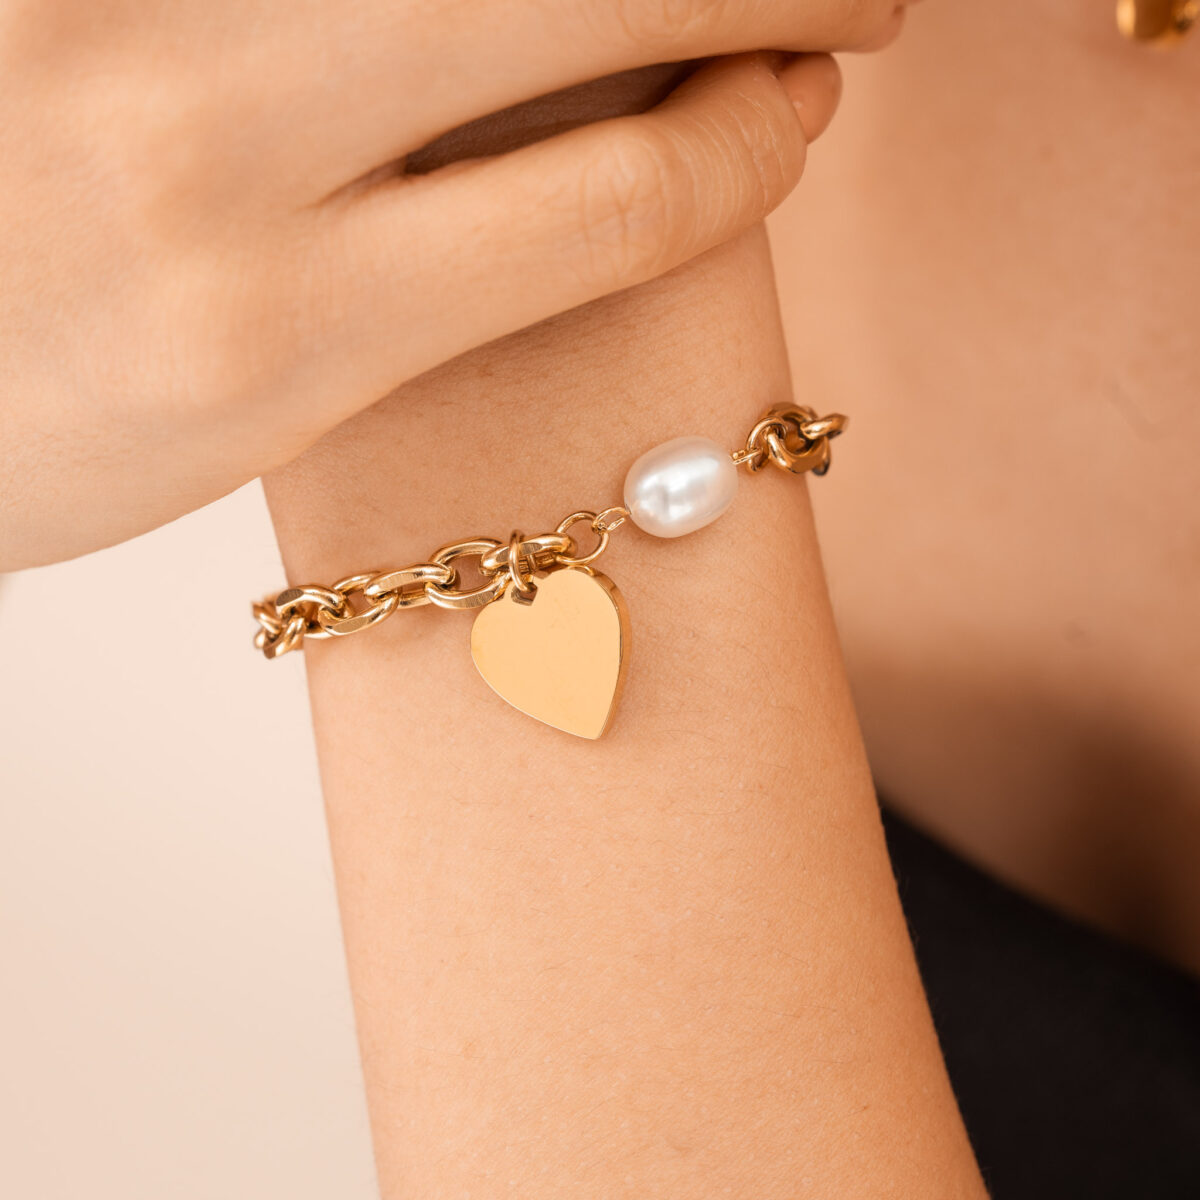 https://m.clubbella.co/product/agate-gold-heart-charm-bracelet/ Agate Gold Heart Charm Bracelet (4)